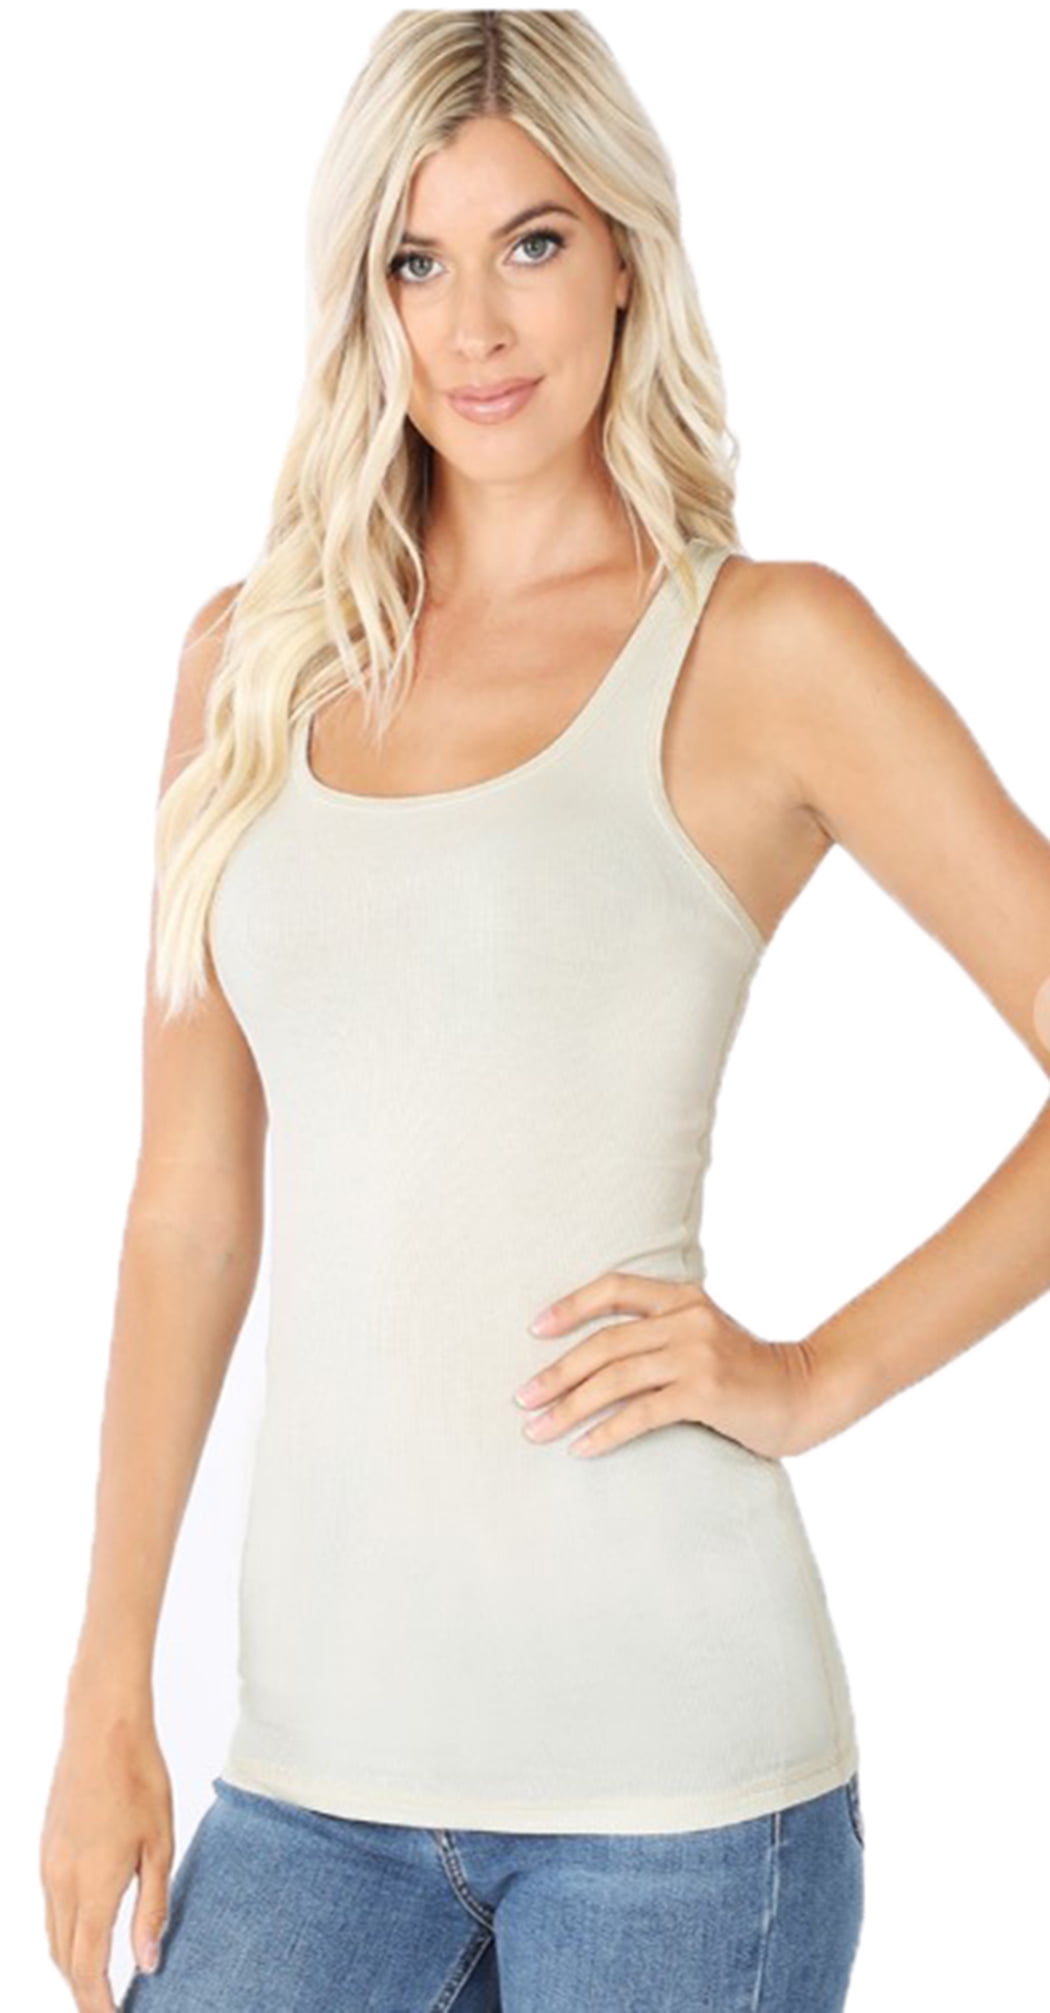 Lightweight Cotton Scooped Neckline Stretchy Racerback Ribbed Tank top for  Women (White, Medium)